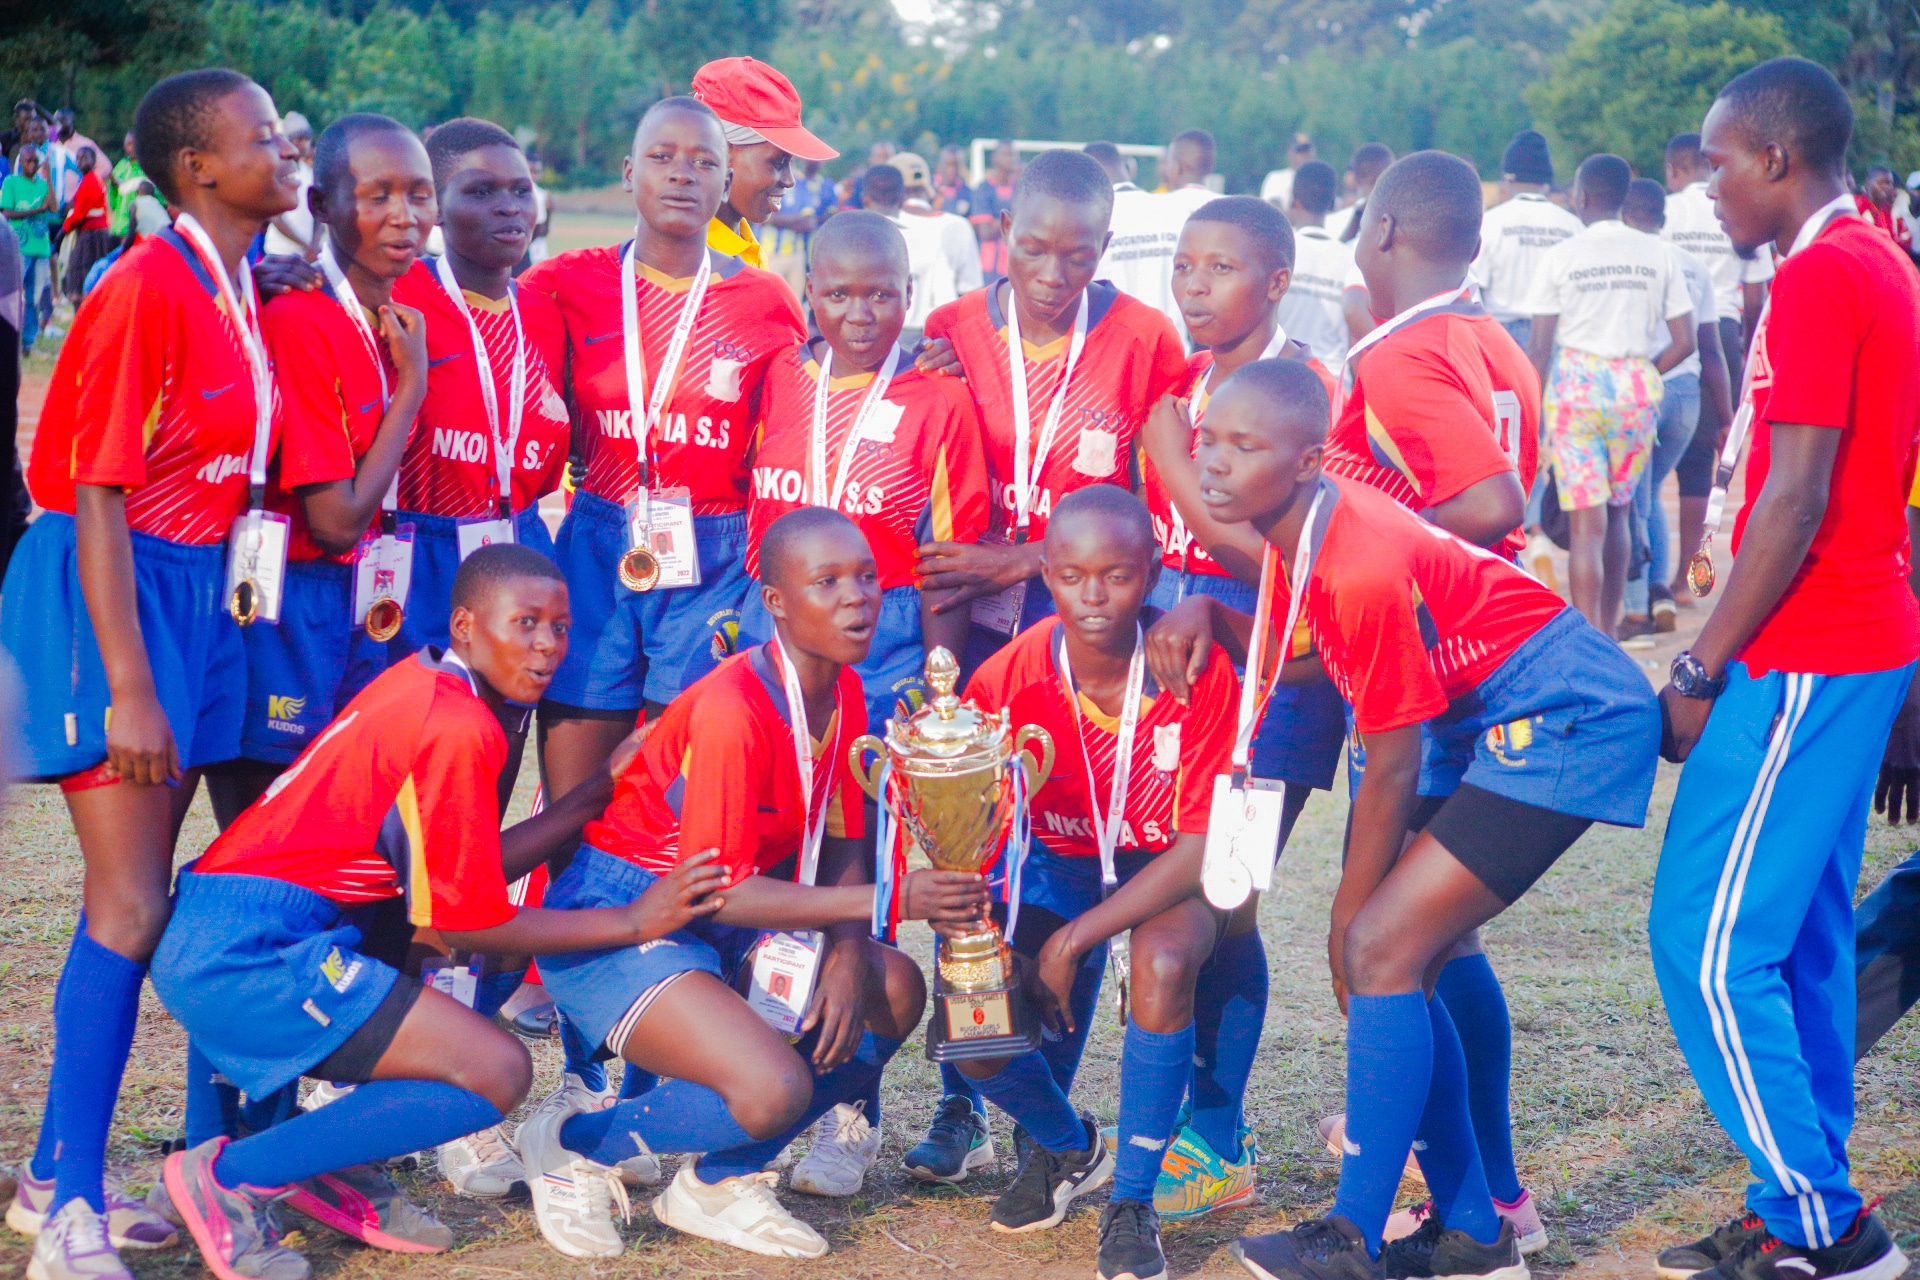 USSSA Ball Games II Champions In Celebrations